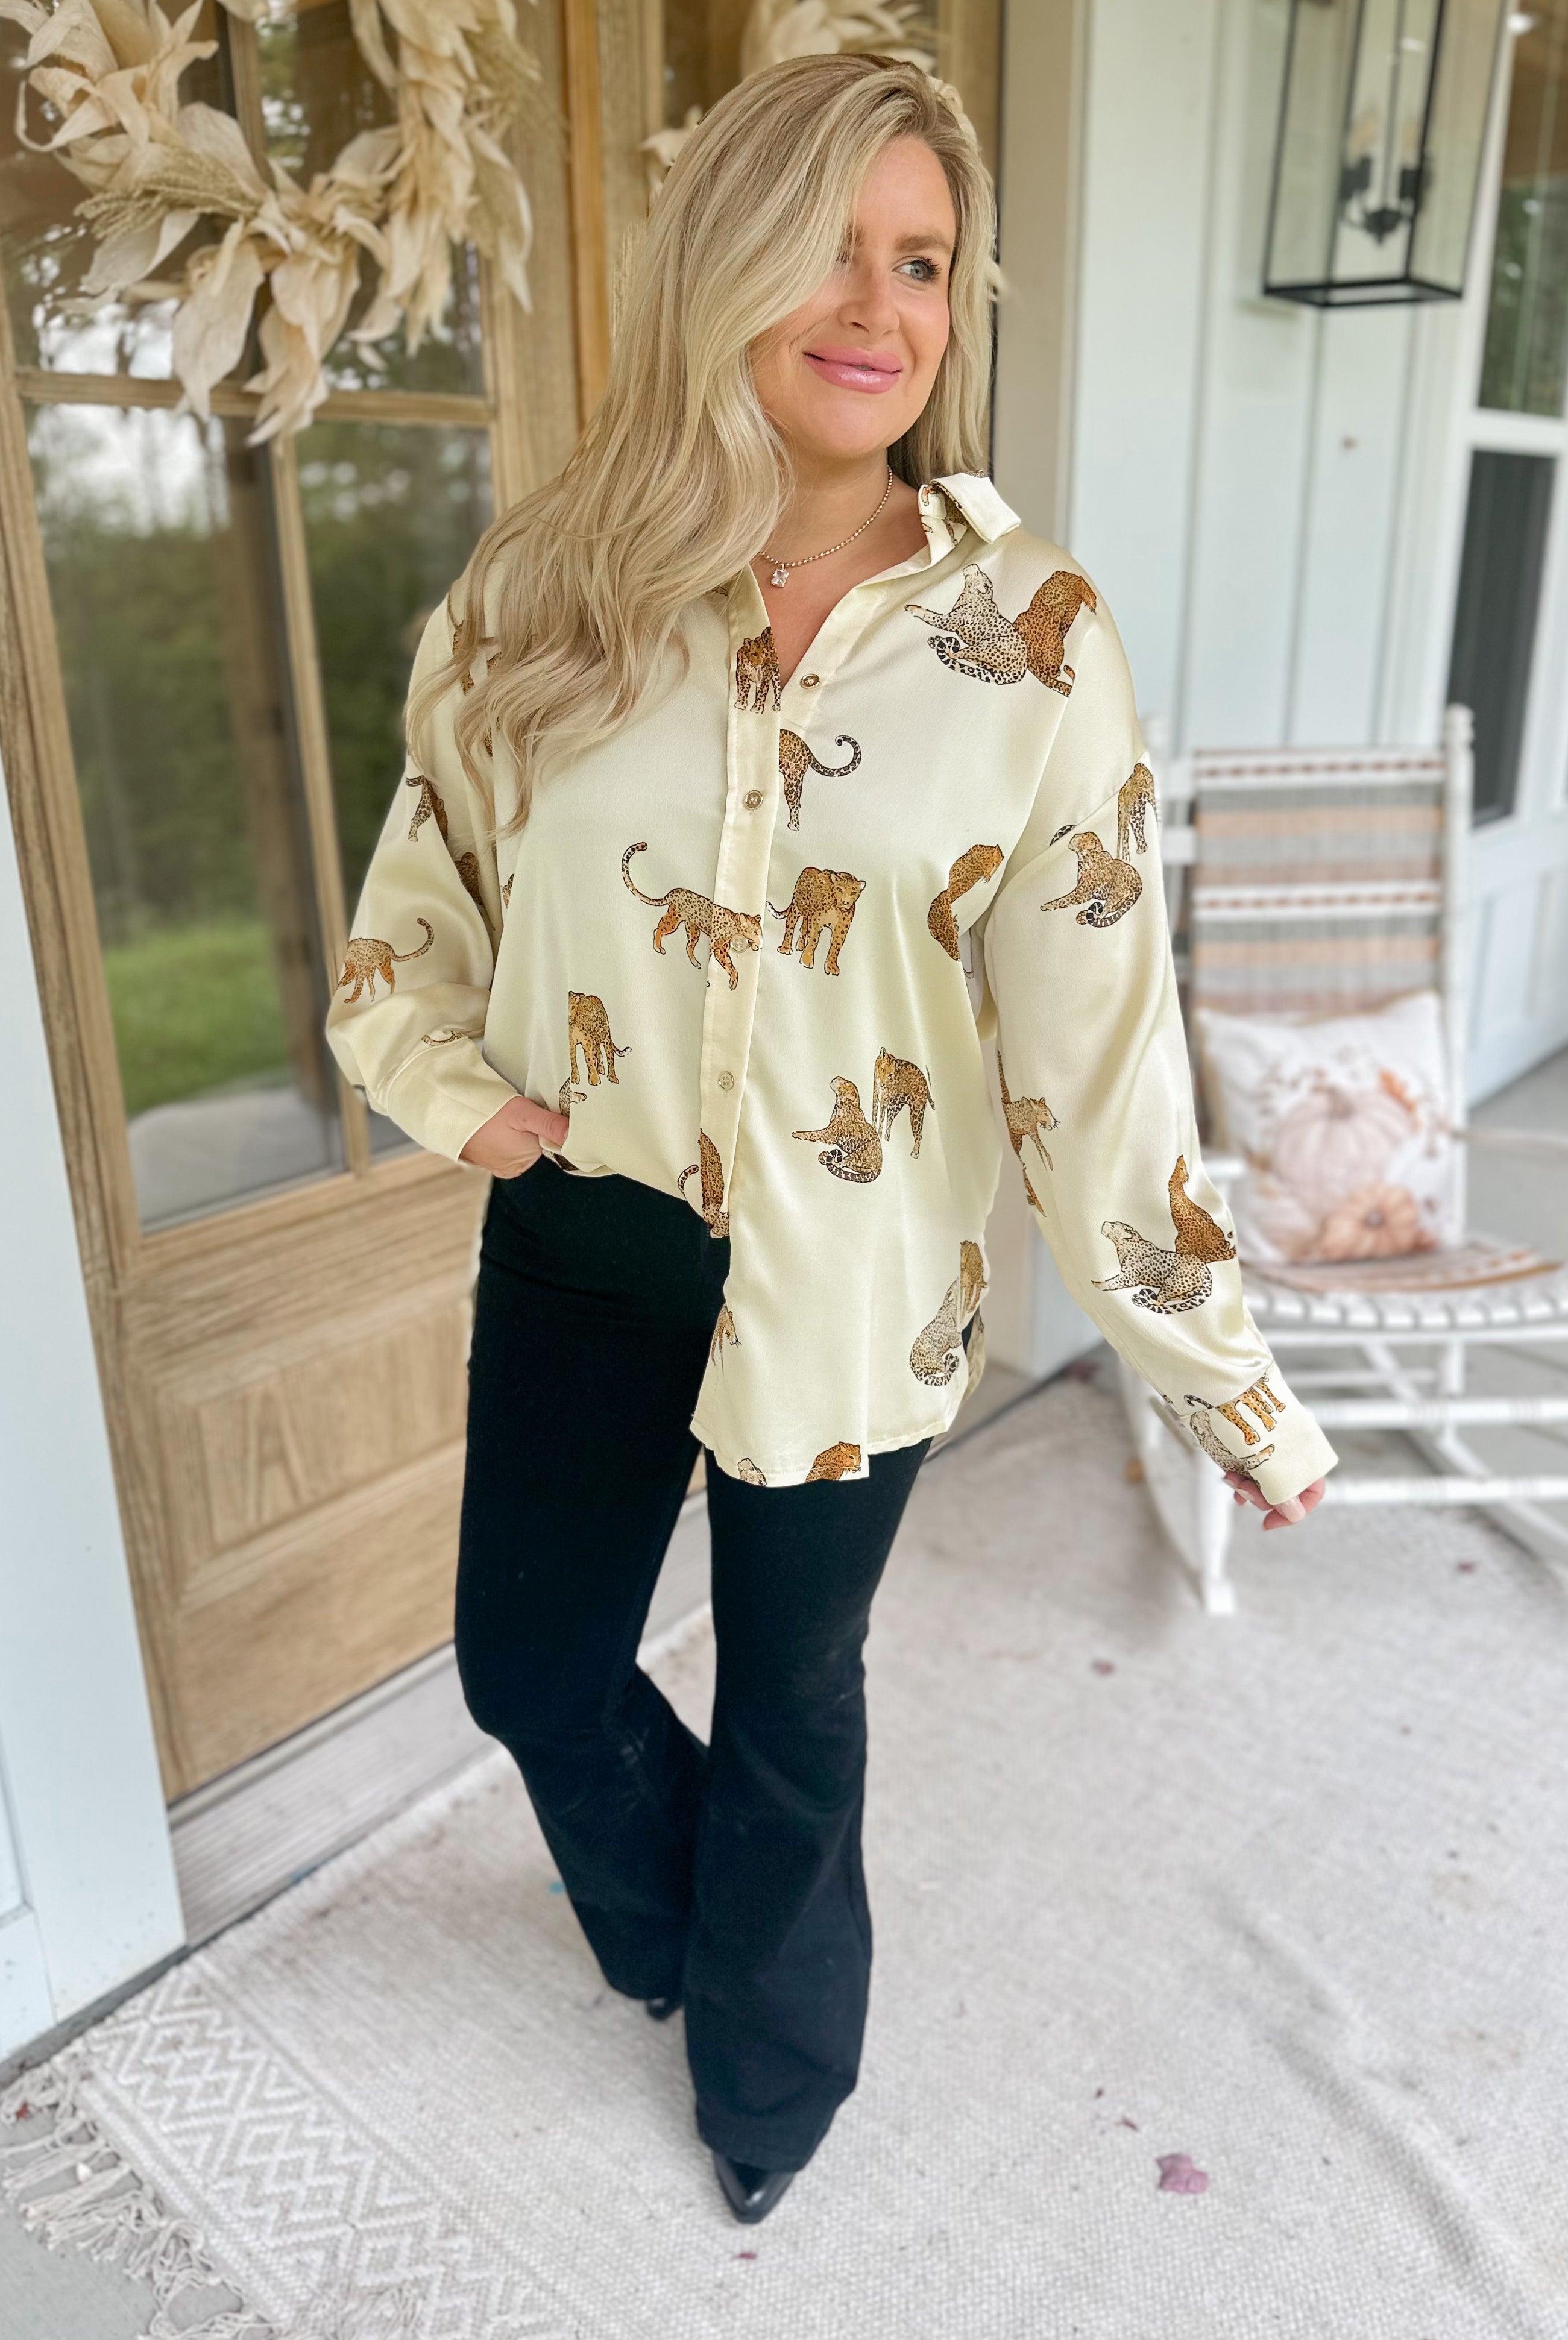 Mateo Animal Print Button Up Long Sleeve Blouse Top - Be You Boutique